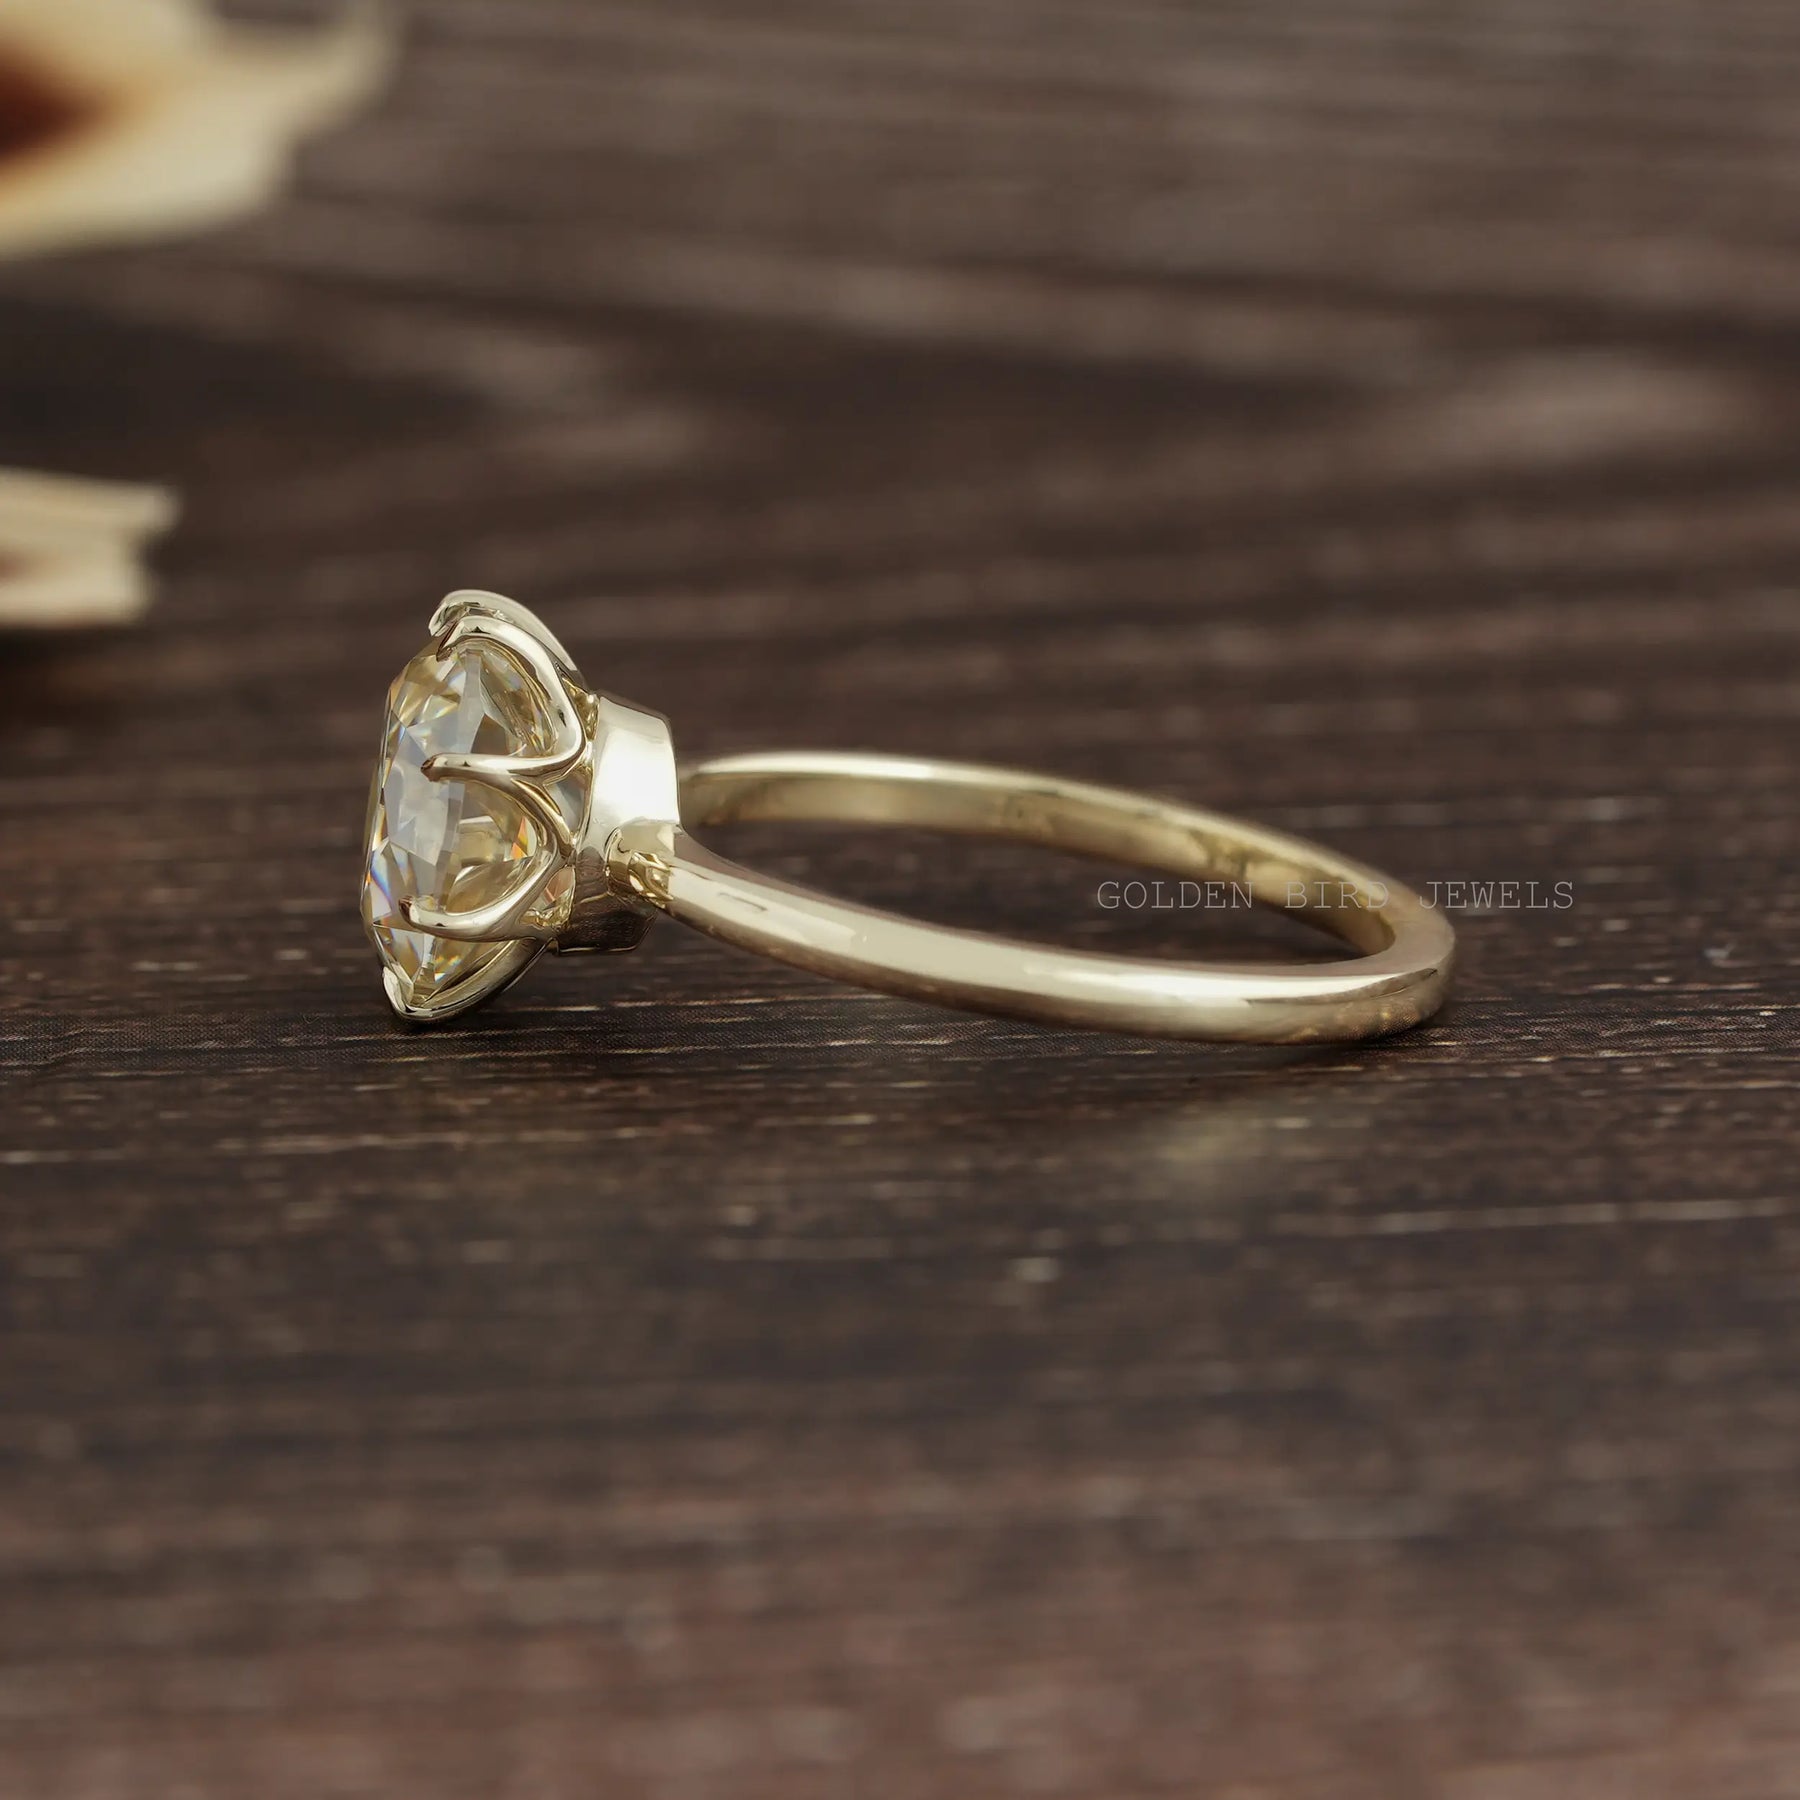 [Round Cut Moissanite Engagement Ring In 14k Yellow Gold]-[Golden Bird Jewels]